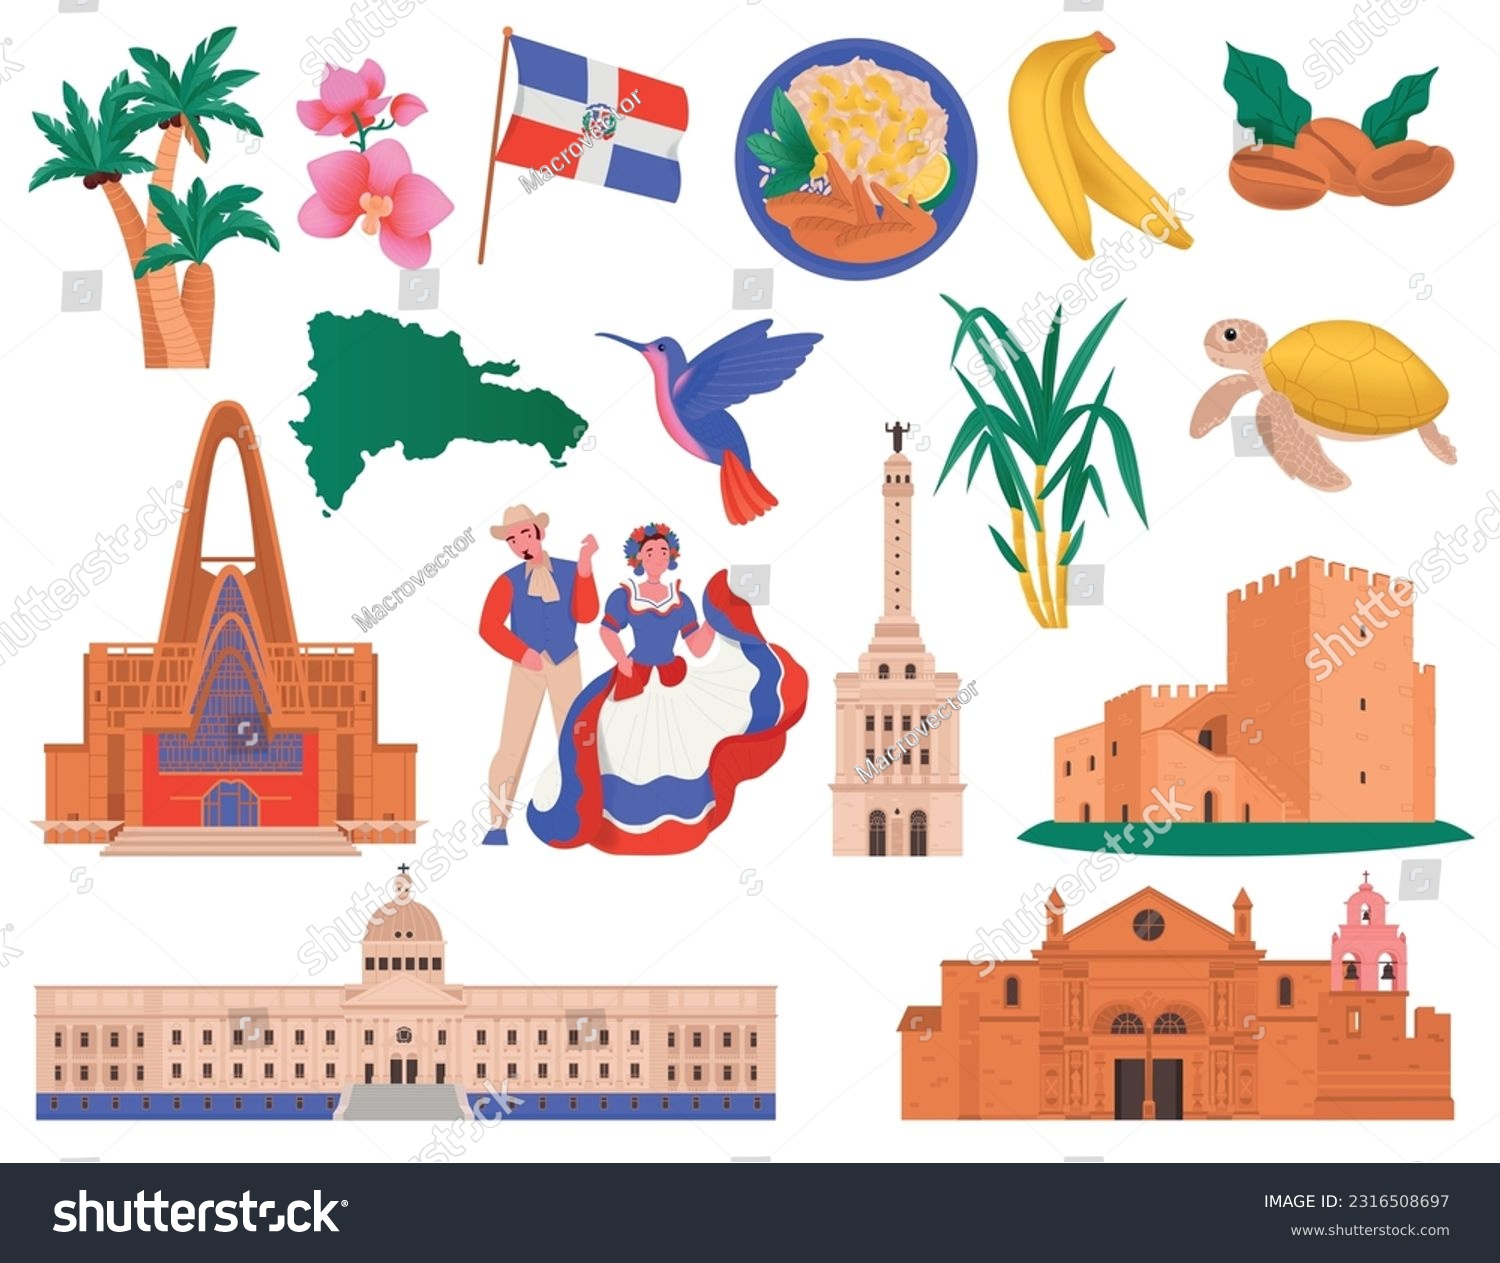 Dominican republic travel set with isolated front view icons of famous buildings sights food and nature vector illustration #2316508697